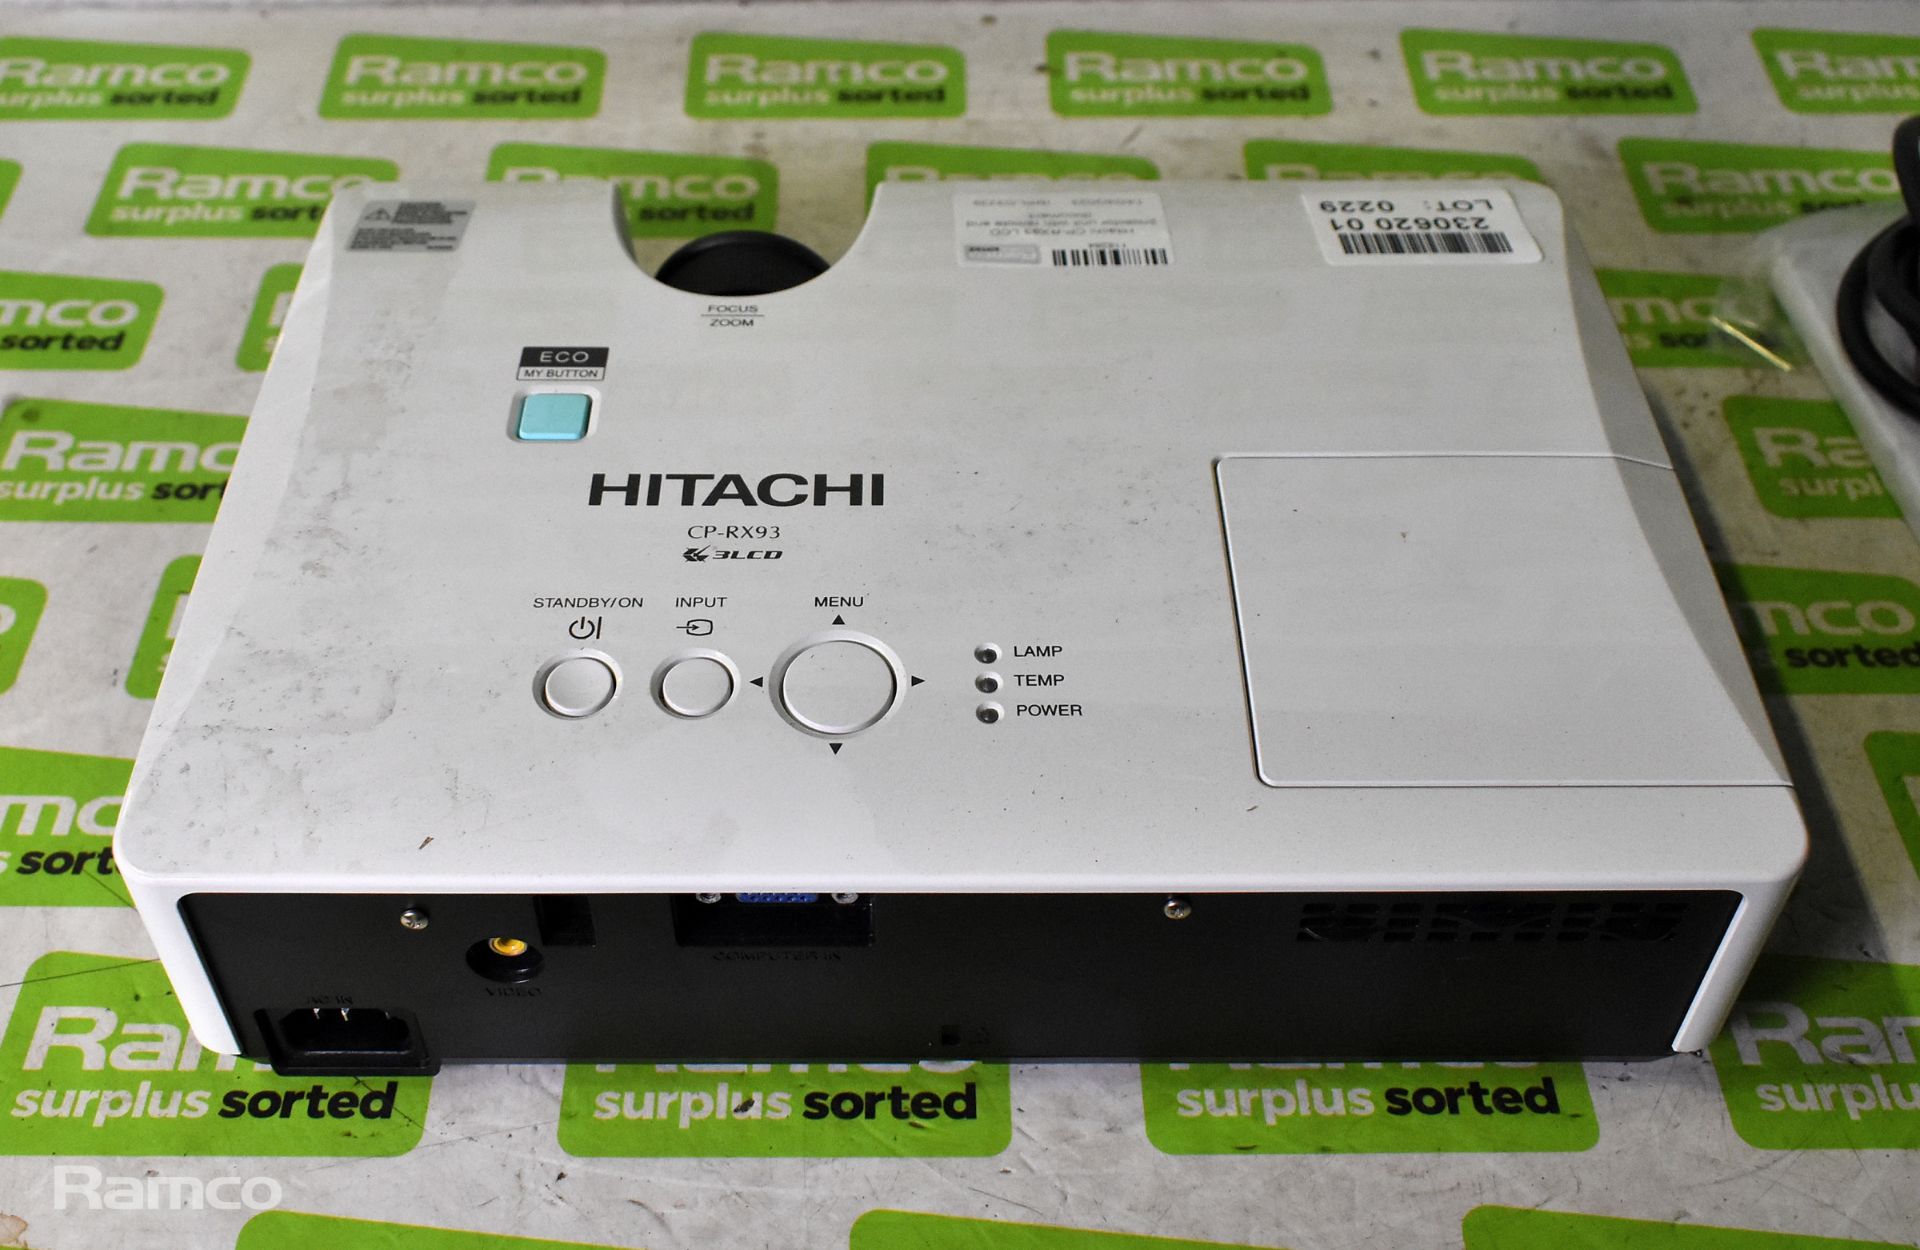 Hitachi CP-RX93 LCD projector unit with remote and document - Bild 2 aus 4